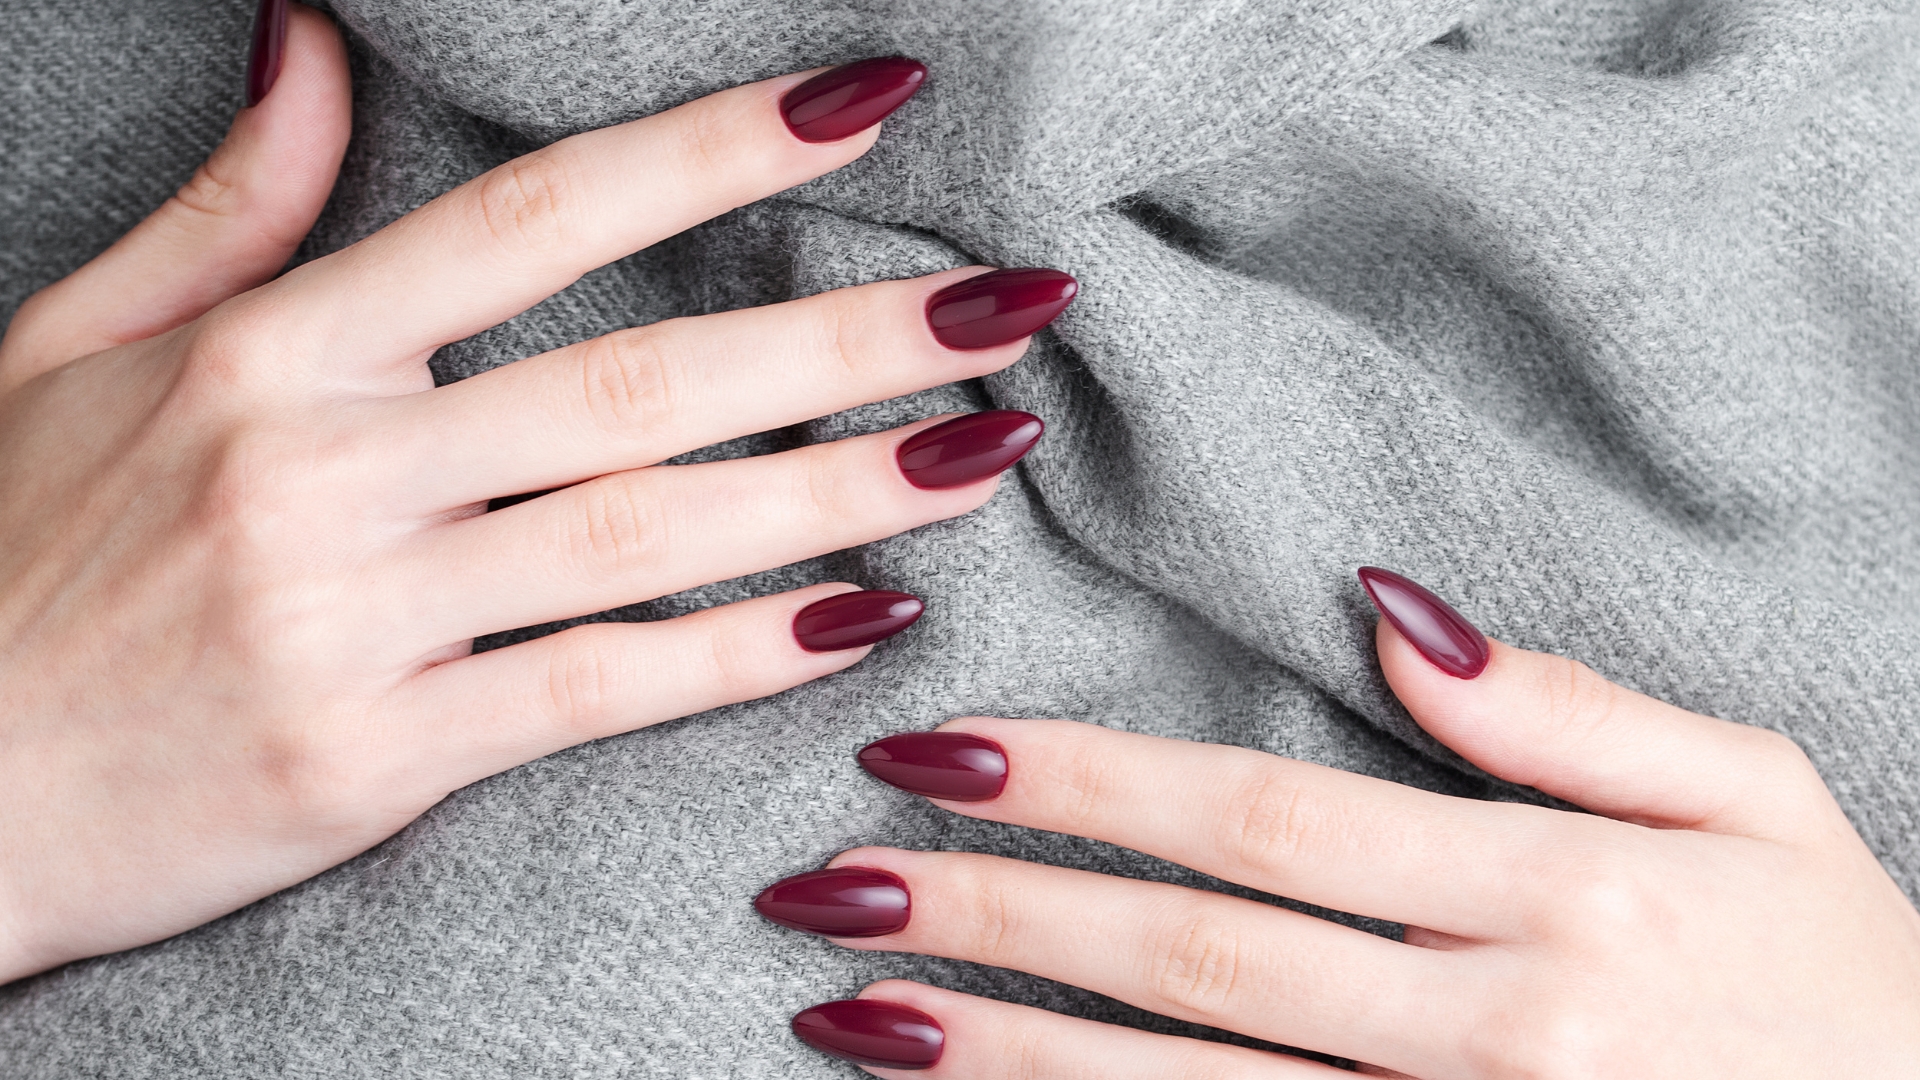 5 Black Cherry nail looks for an expensive finish this winter